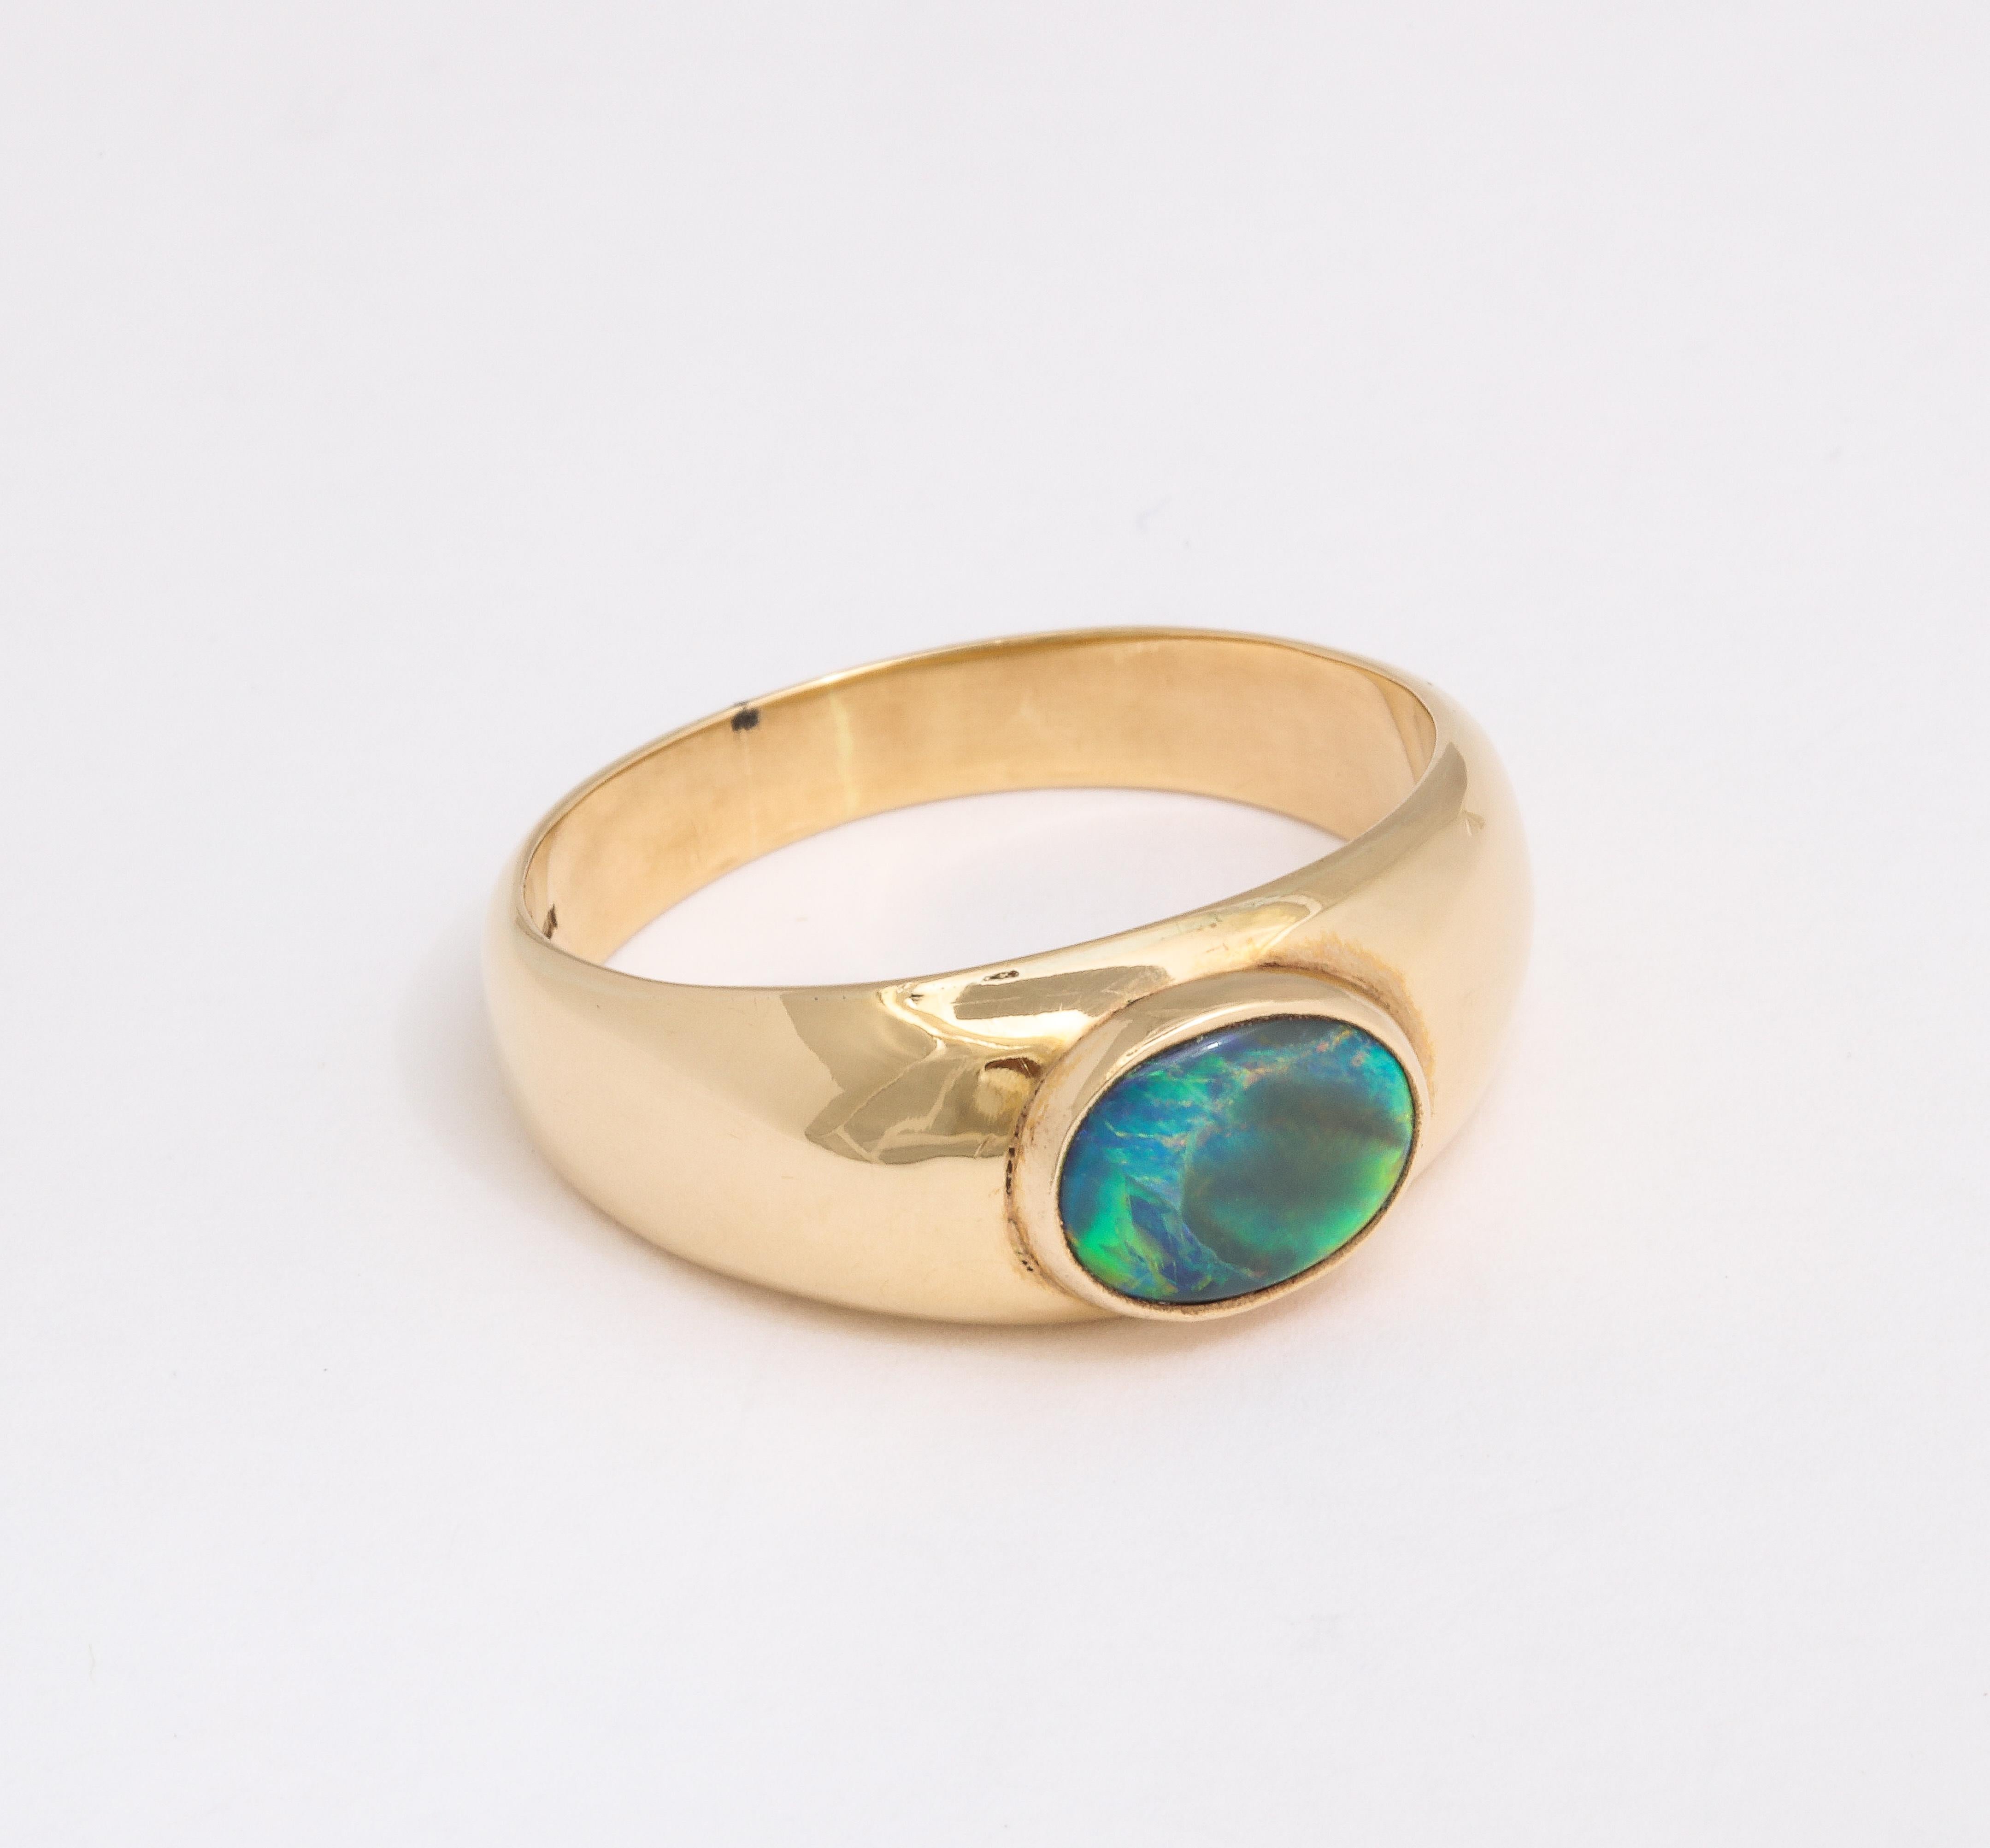 Vintage Gold and Ocean Australian Blue Green Black Opal Ring In Excellent Condition For Sale In Stamford, CT